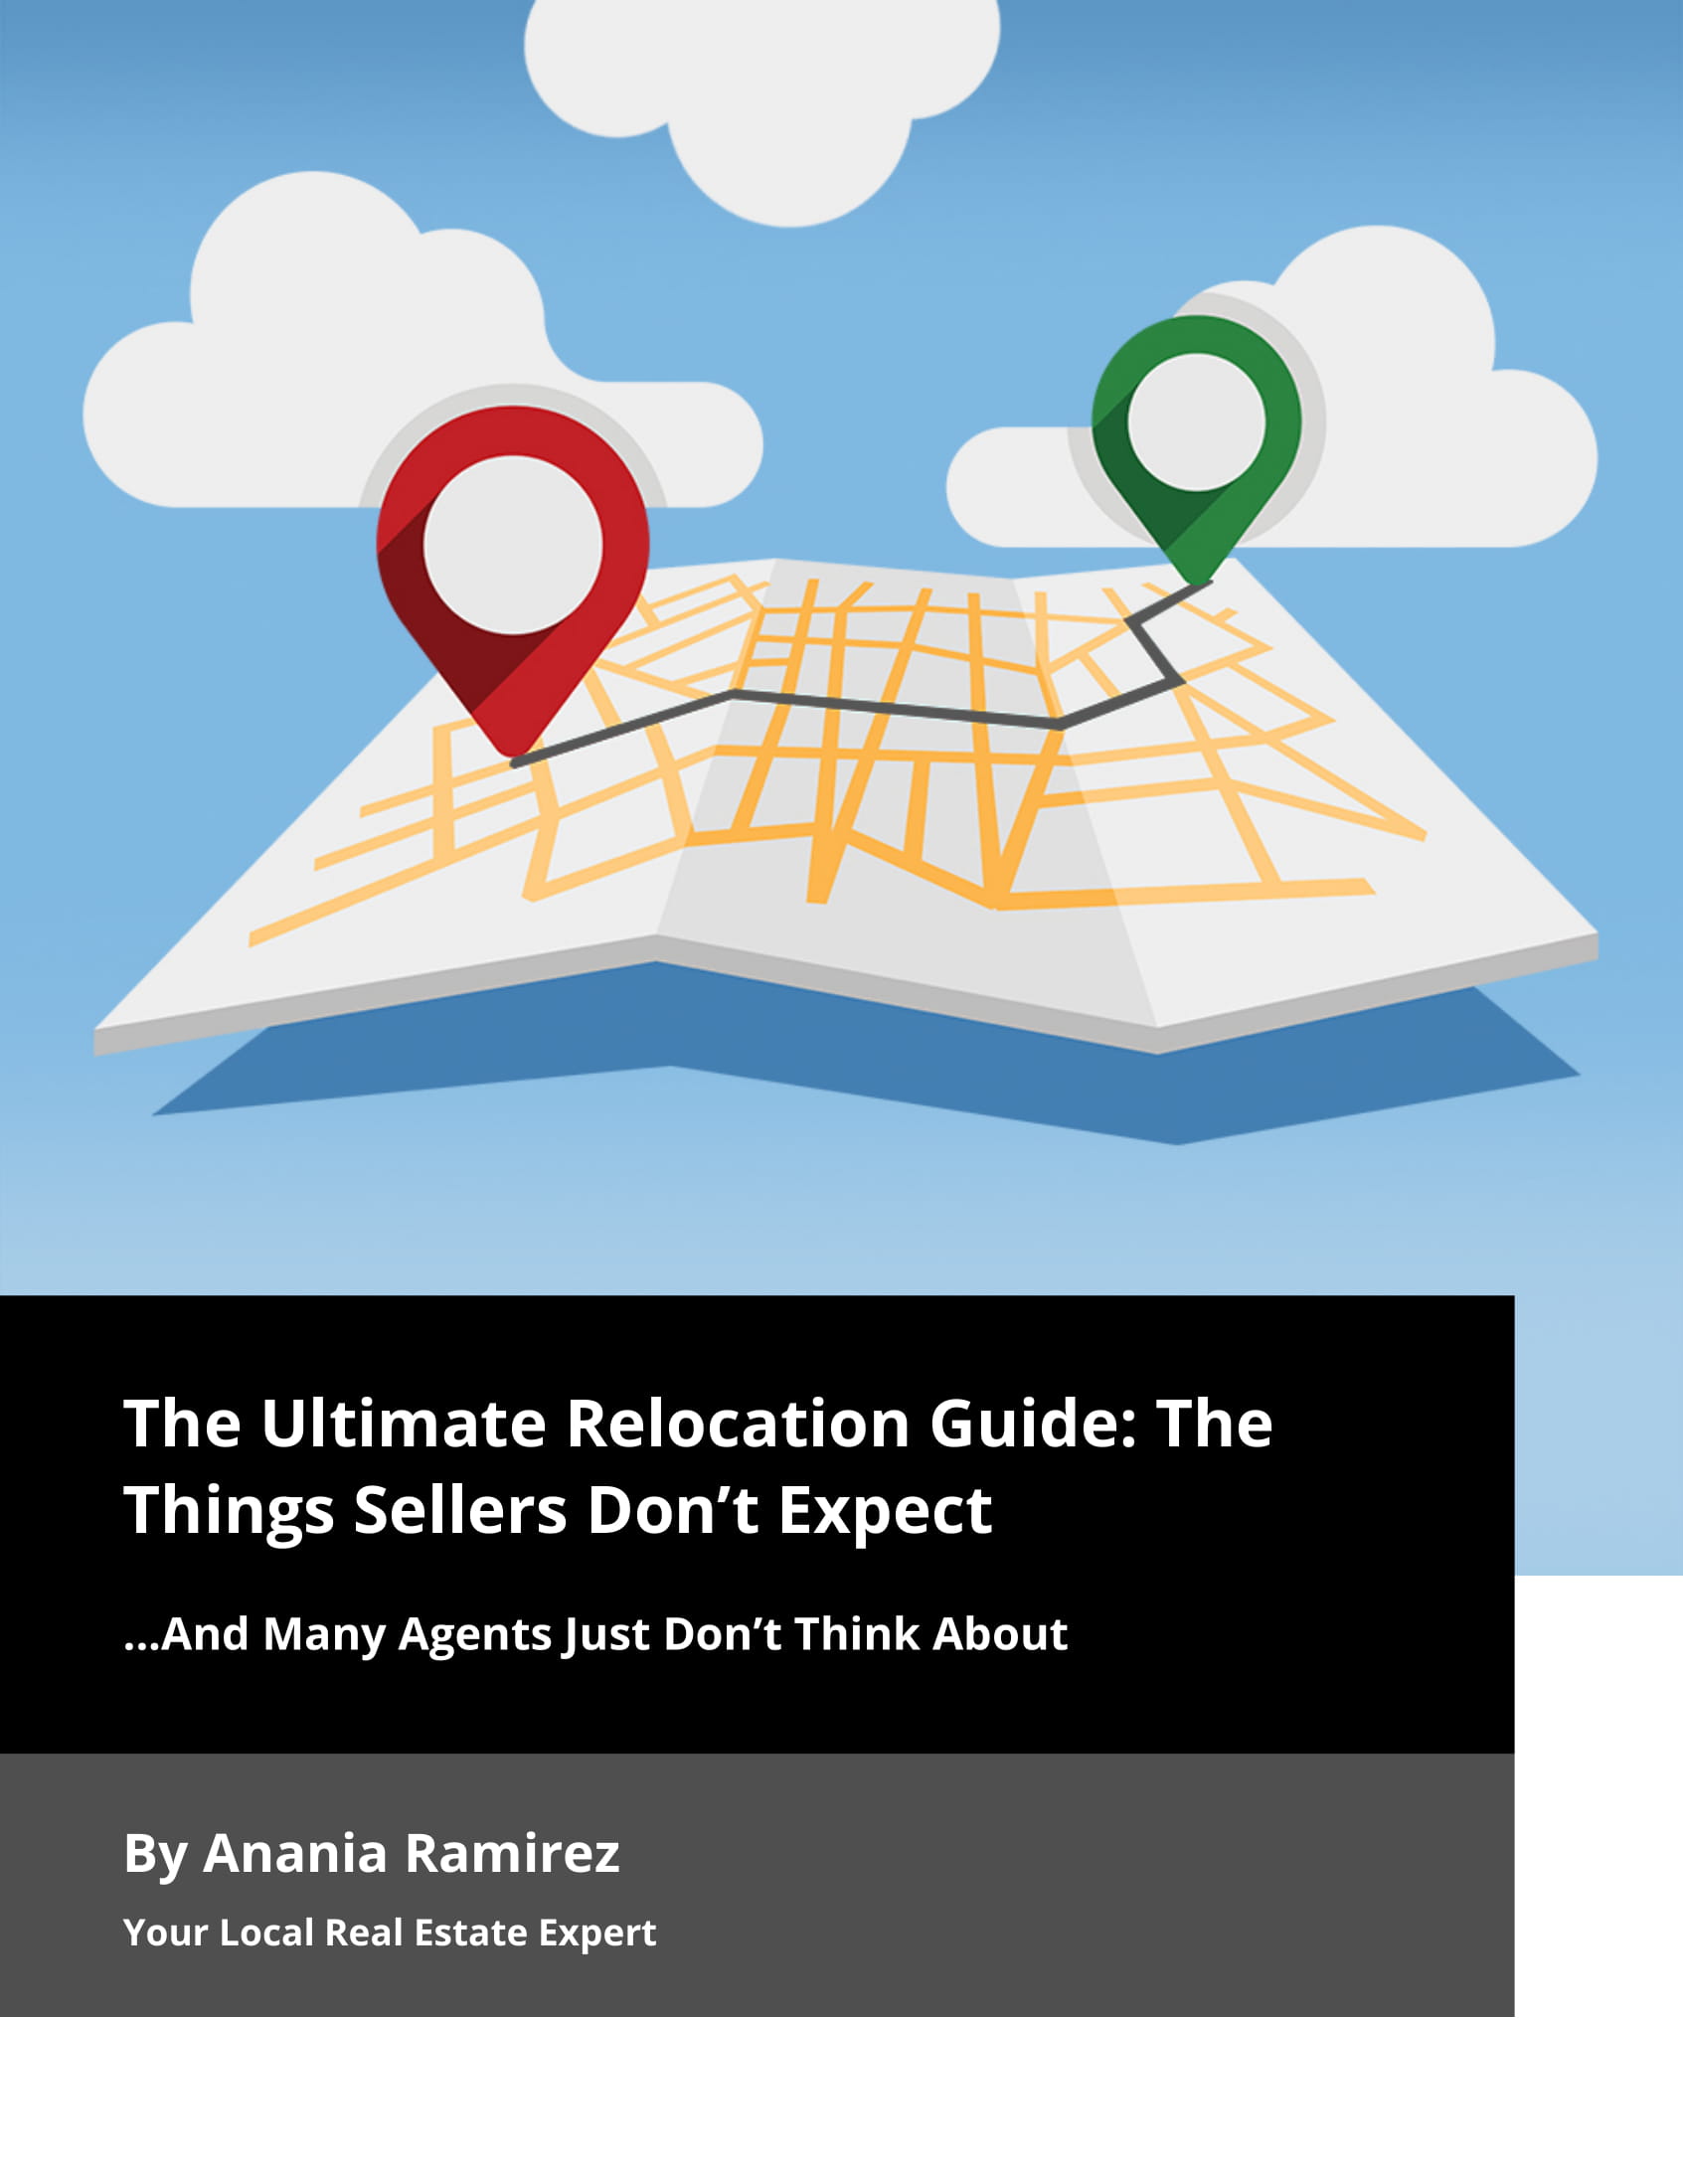 The Ultimate Relocation Guide: The Things Sellers Don’t Expect